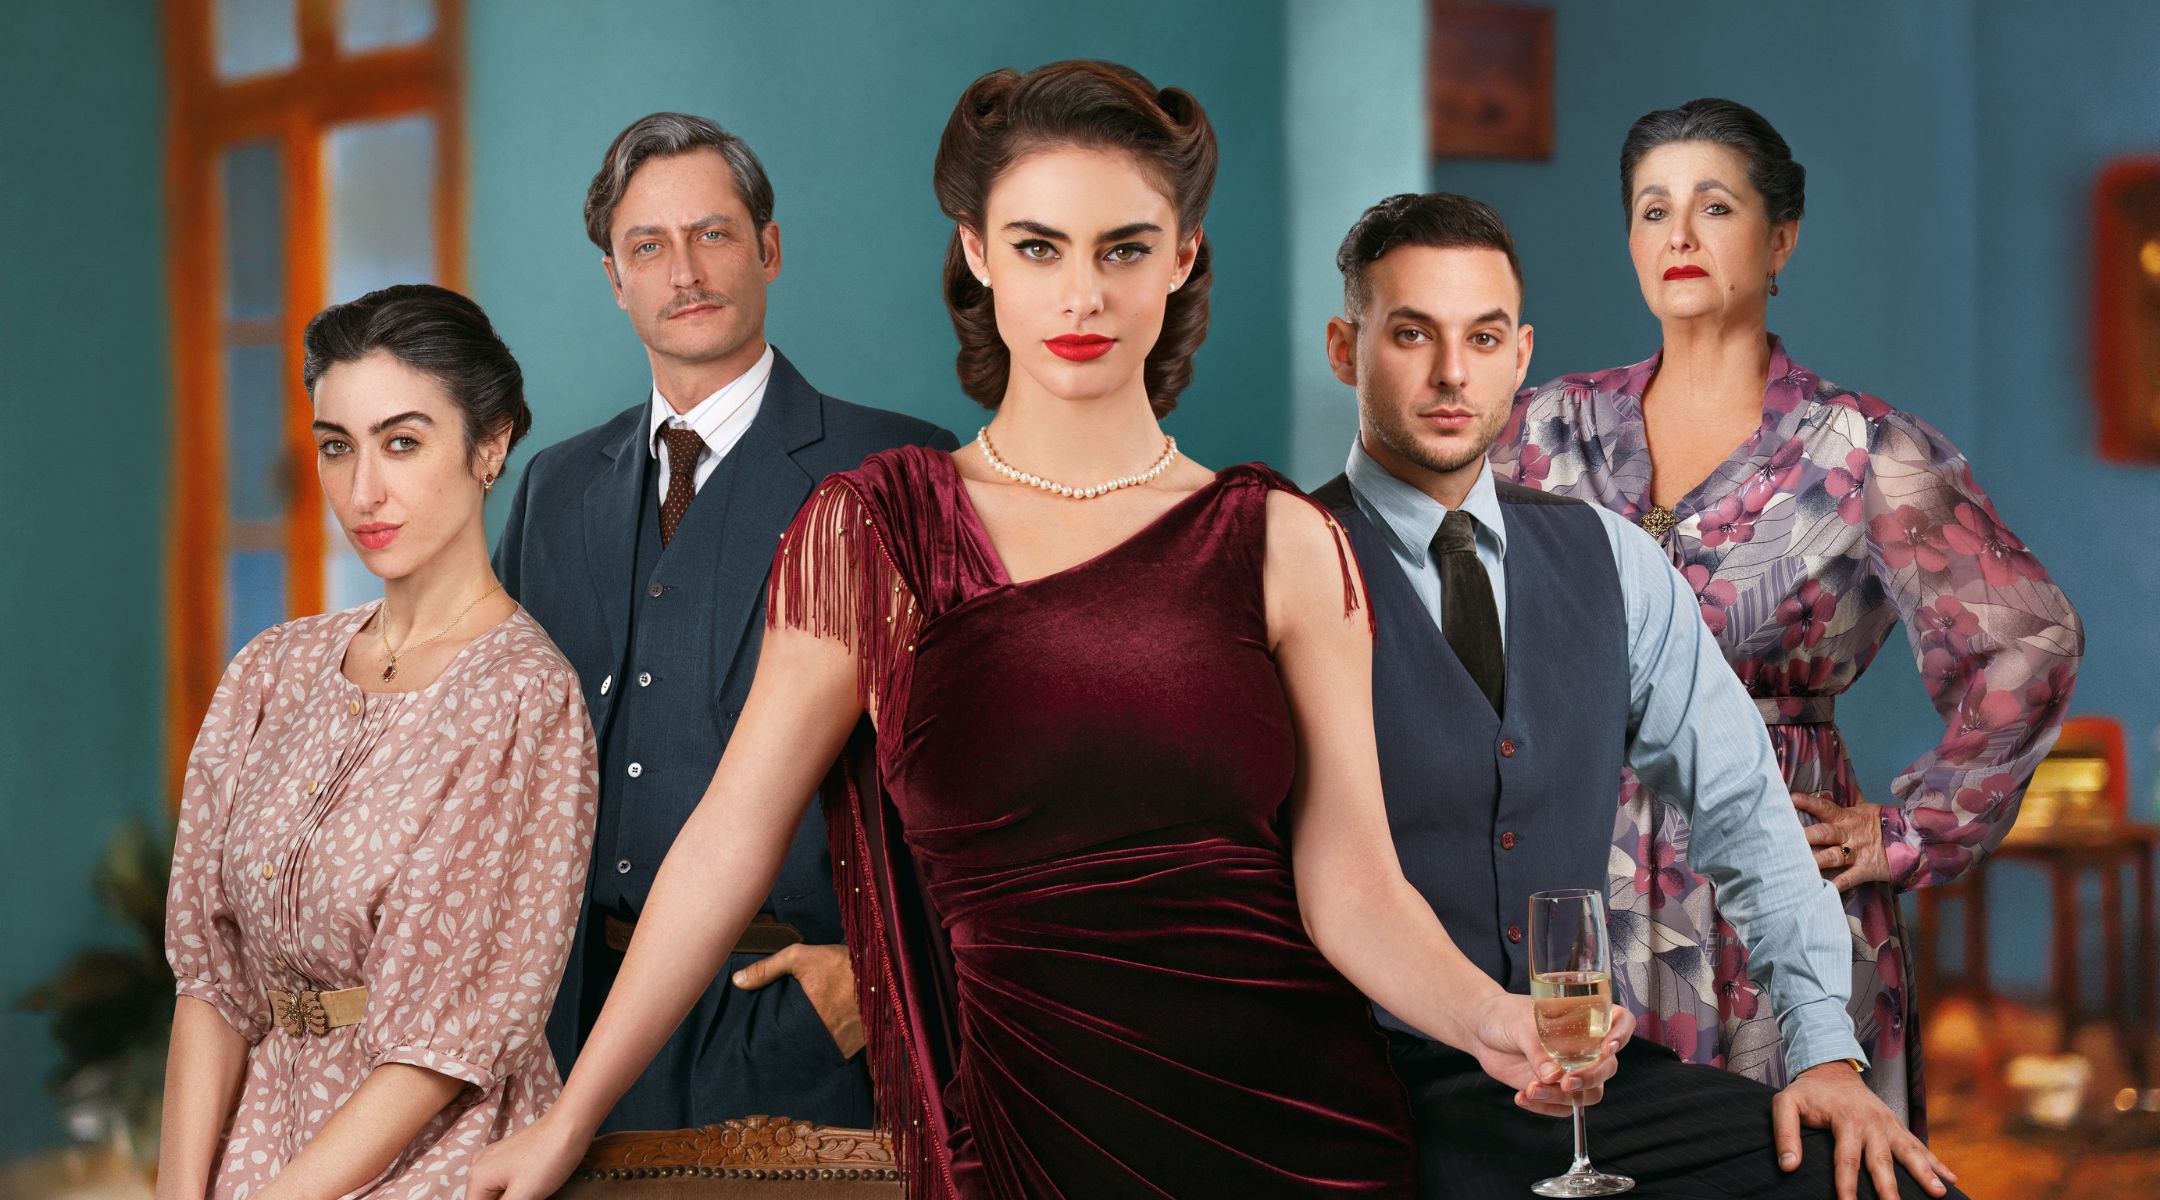 The main cast of “The Beauty Queen of Jerusalem” pictured from left to right: Rosa (Hila Saada), Gabriel (Michael Aloni), Luna (Swell Ariel Or), David (Israel Ogalbo), Merkada (Irit Kaplan) (Courtesy of yes Studios)